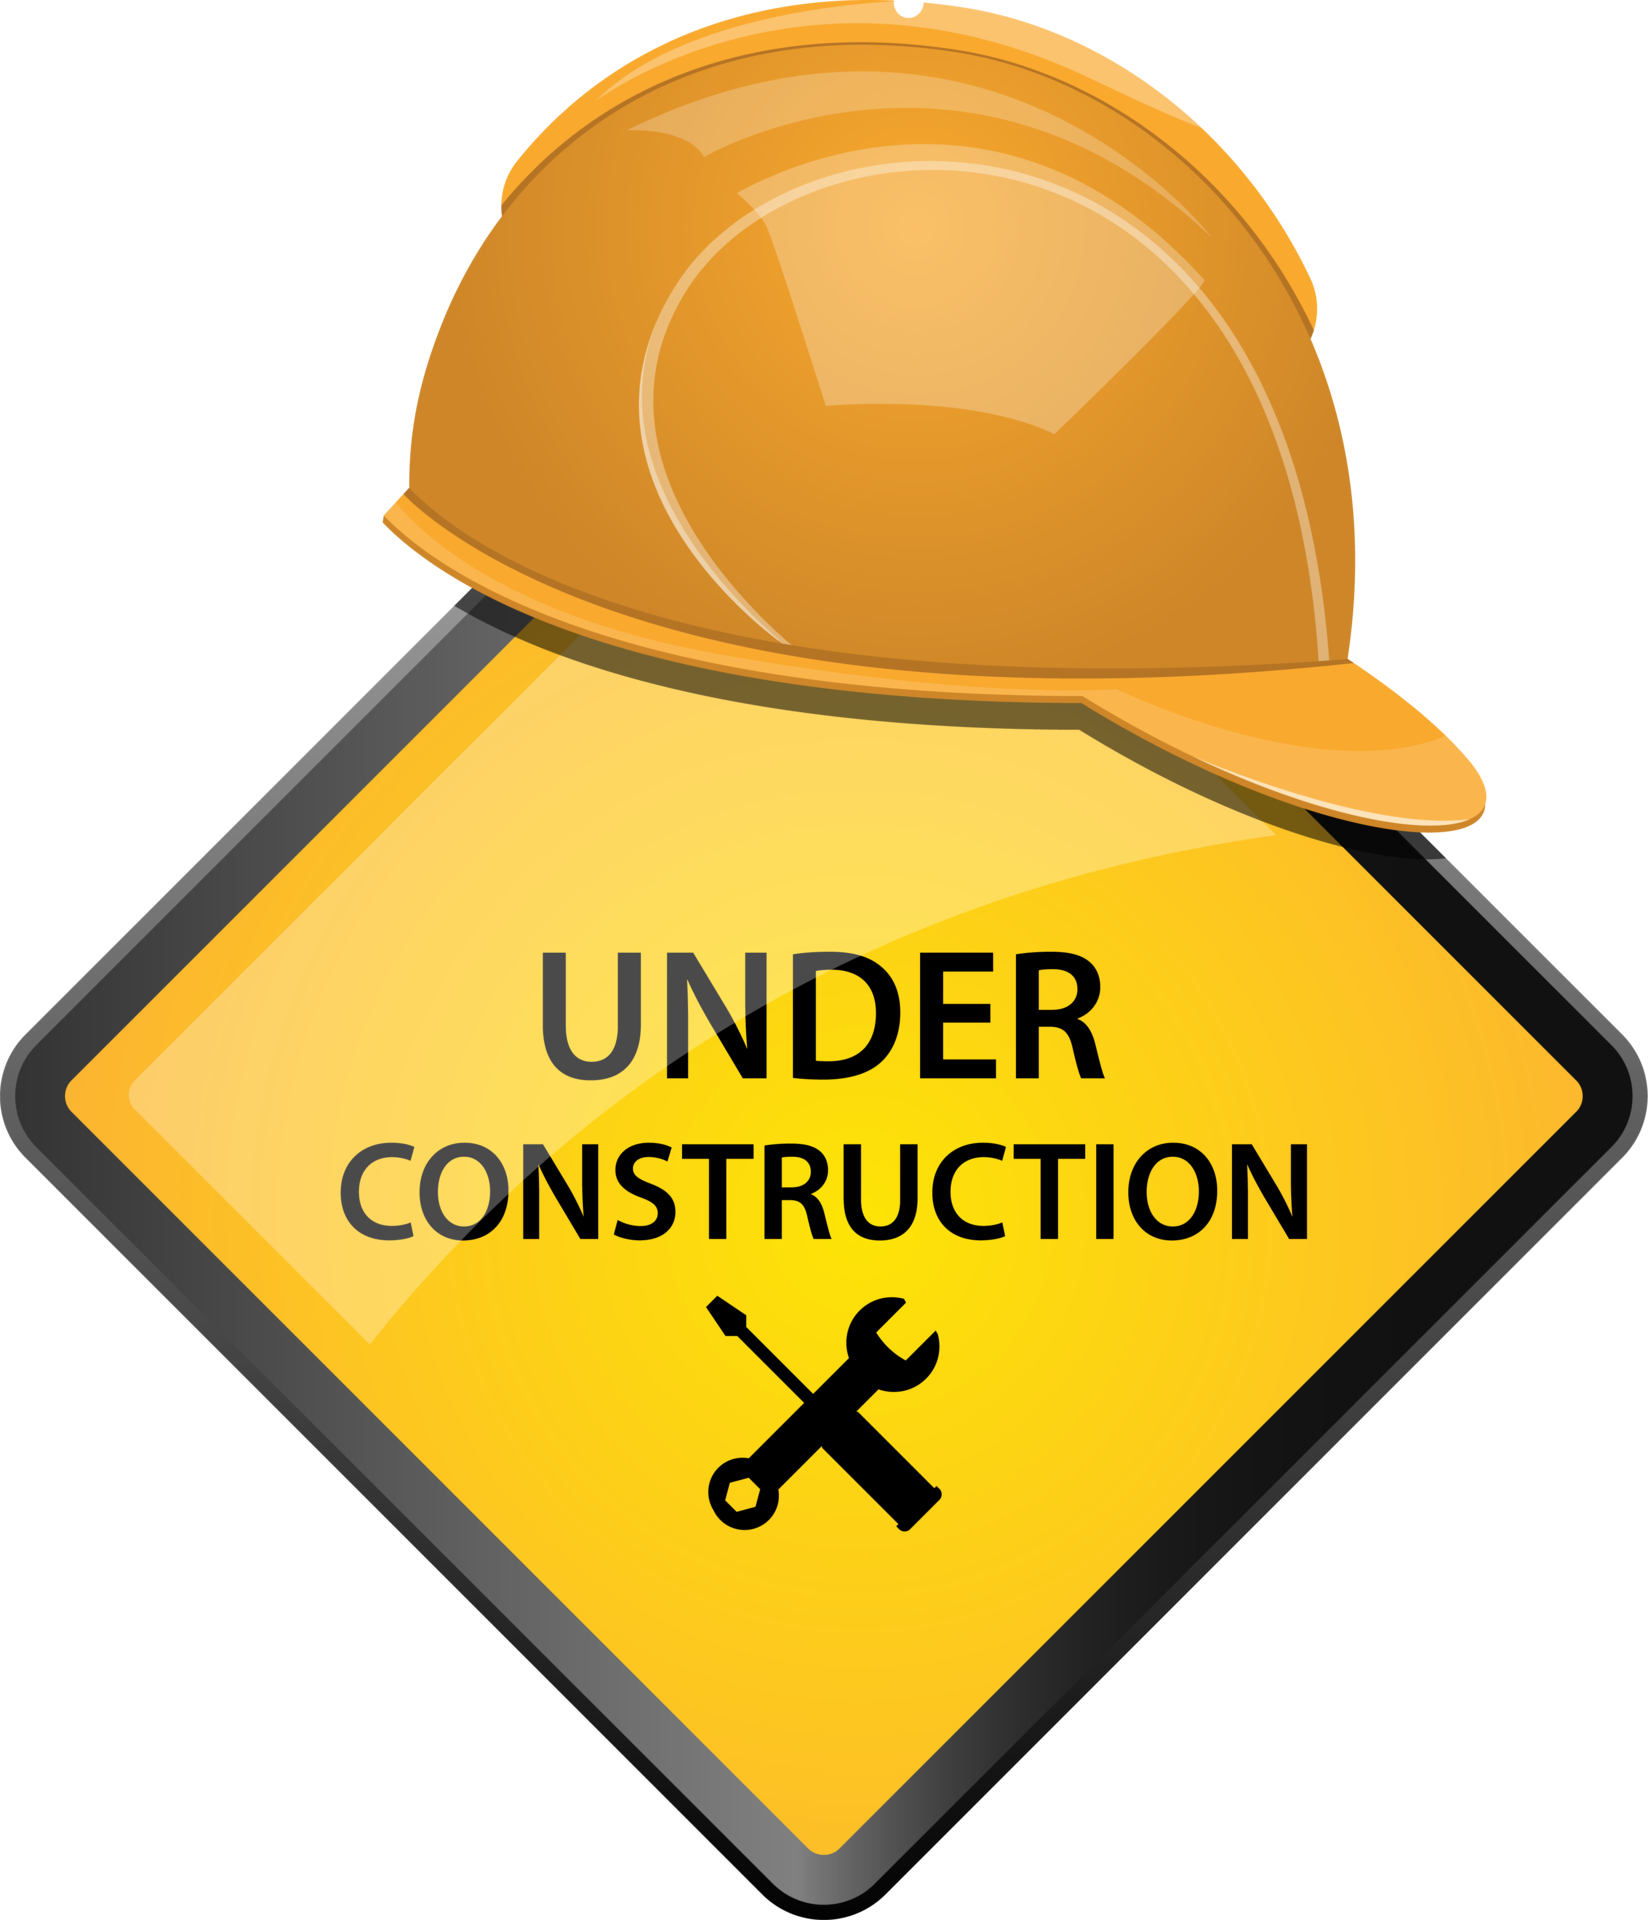 Under Construction PNGs for Free Download